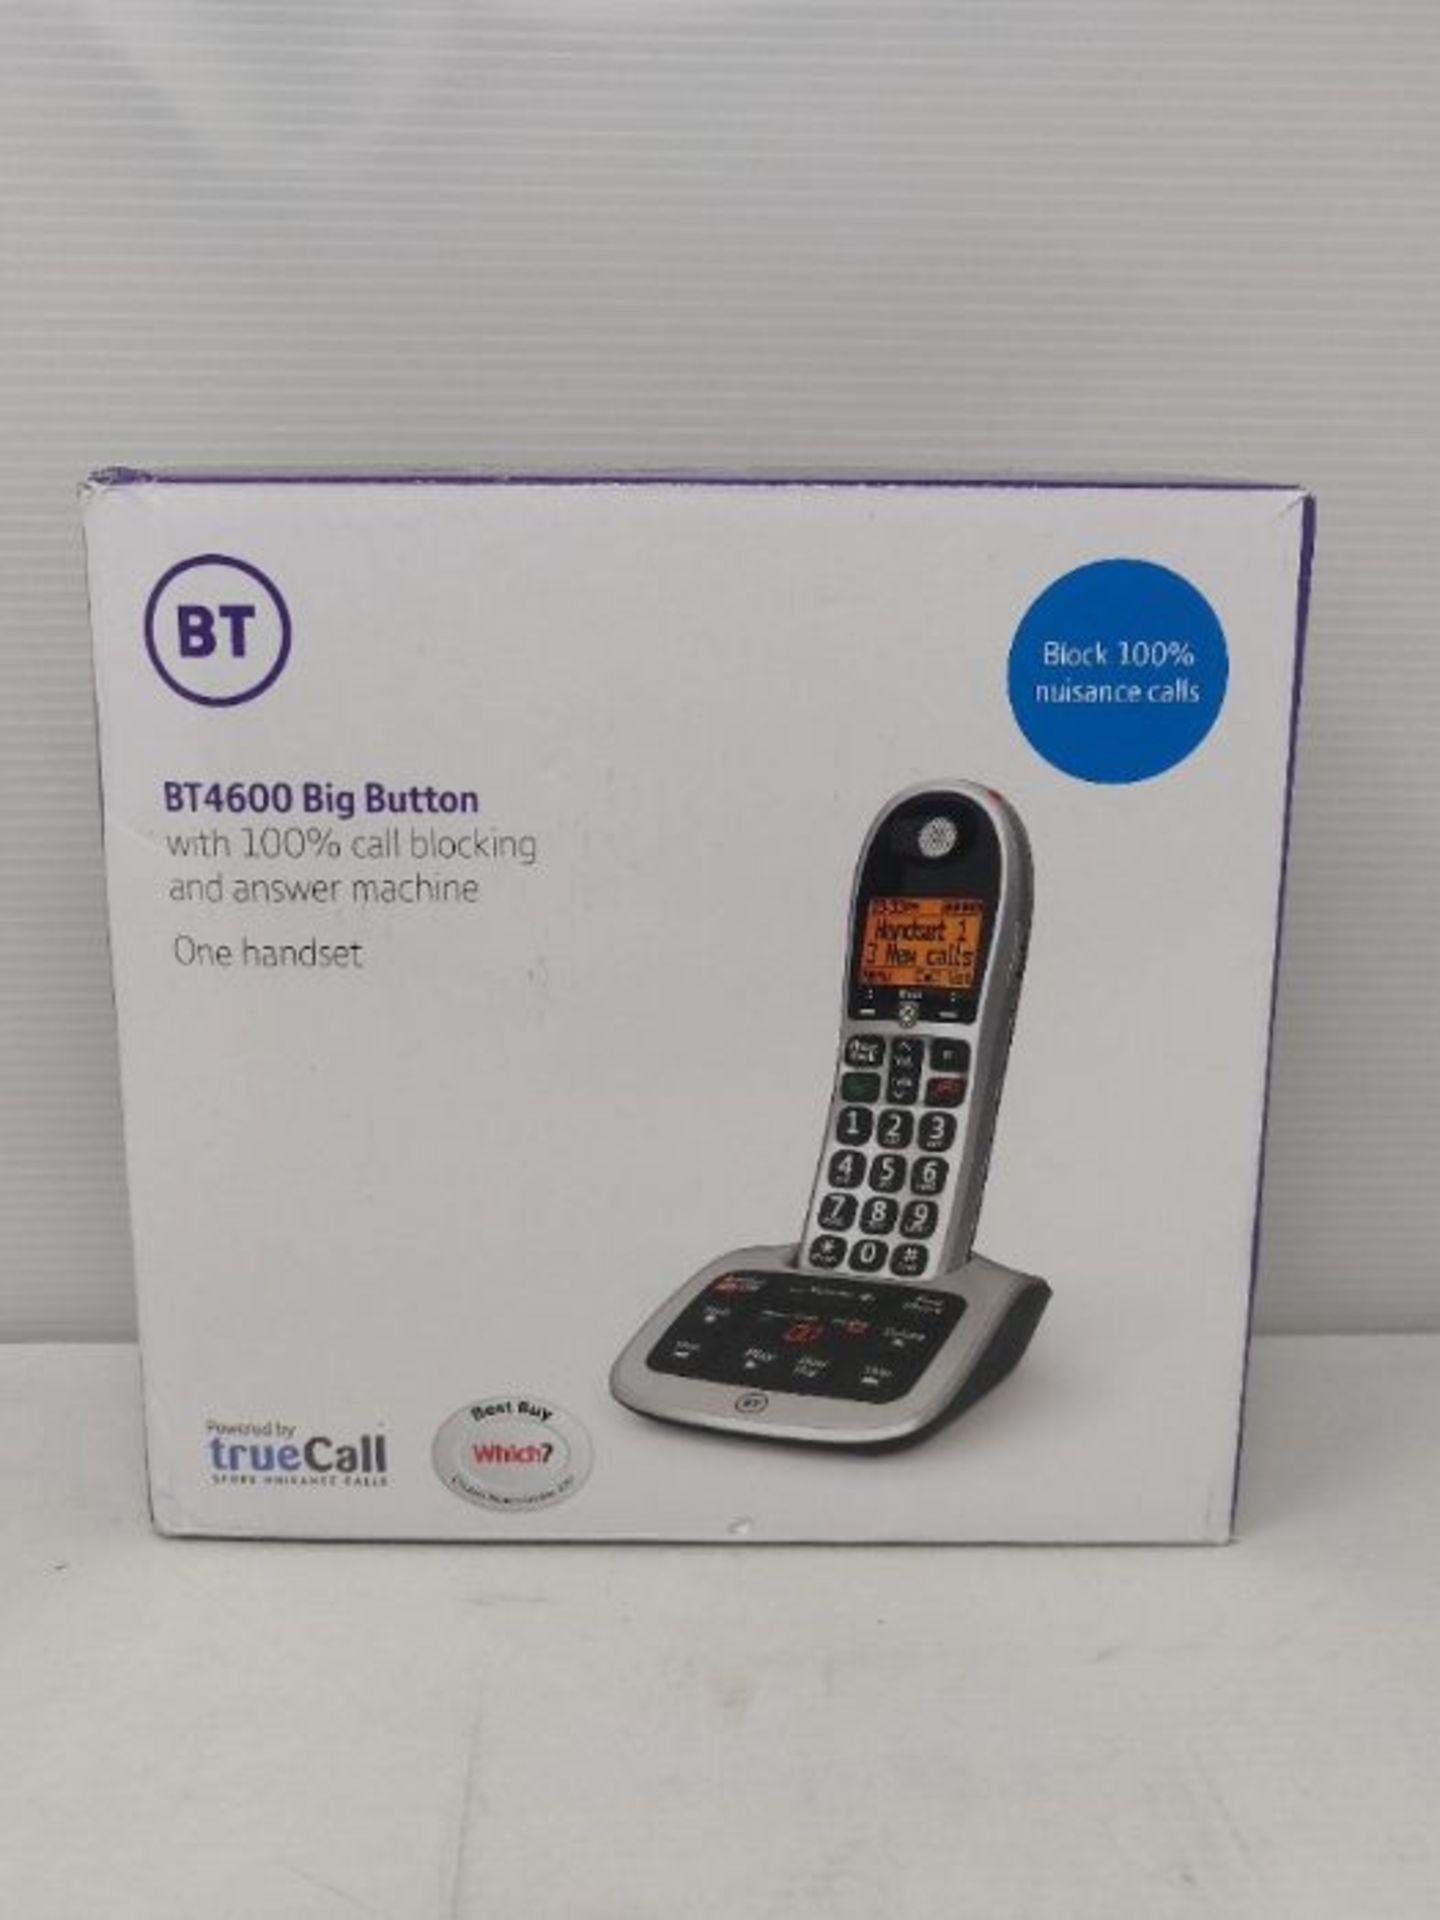 BT 4600 Big Button Advanced Call Blocker Home Phone with Answer Machine - Image 2 of 3